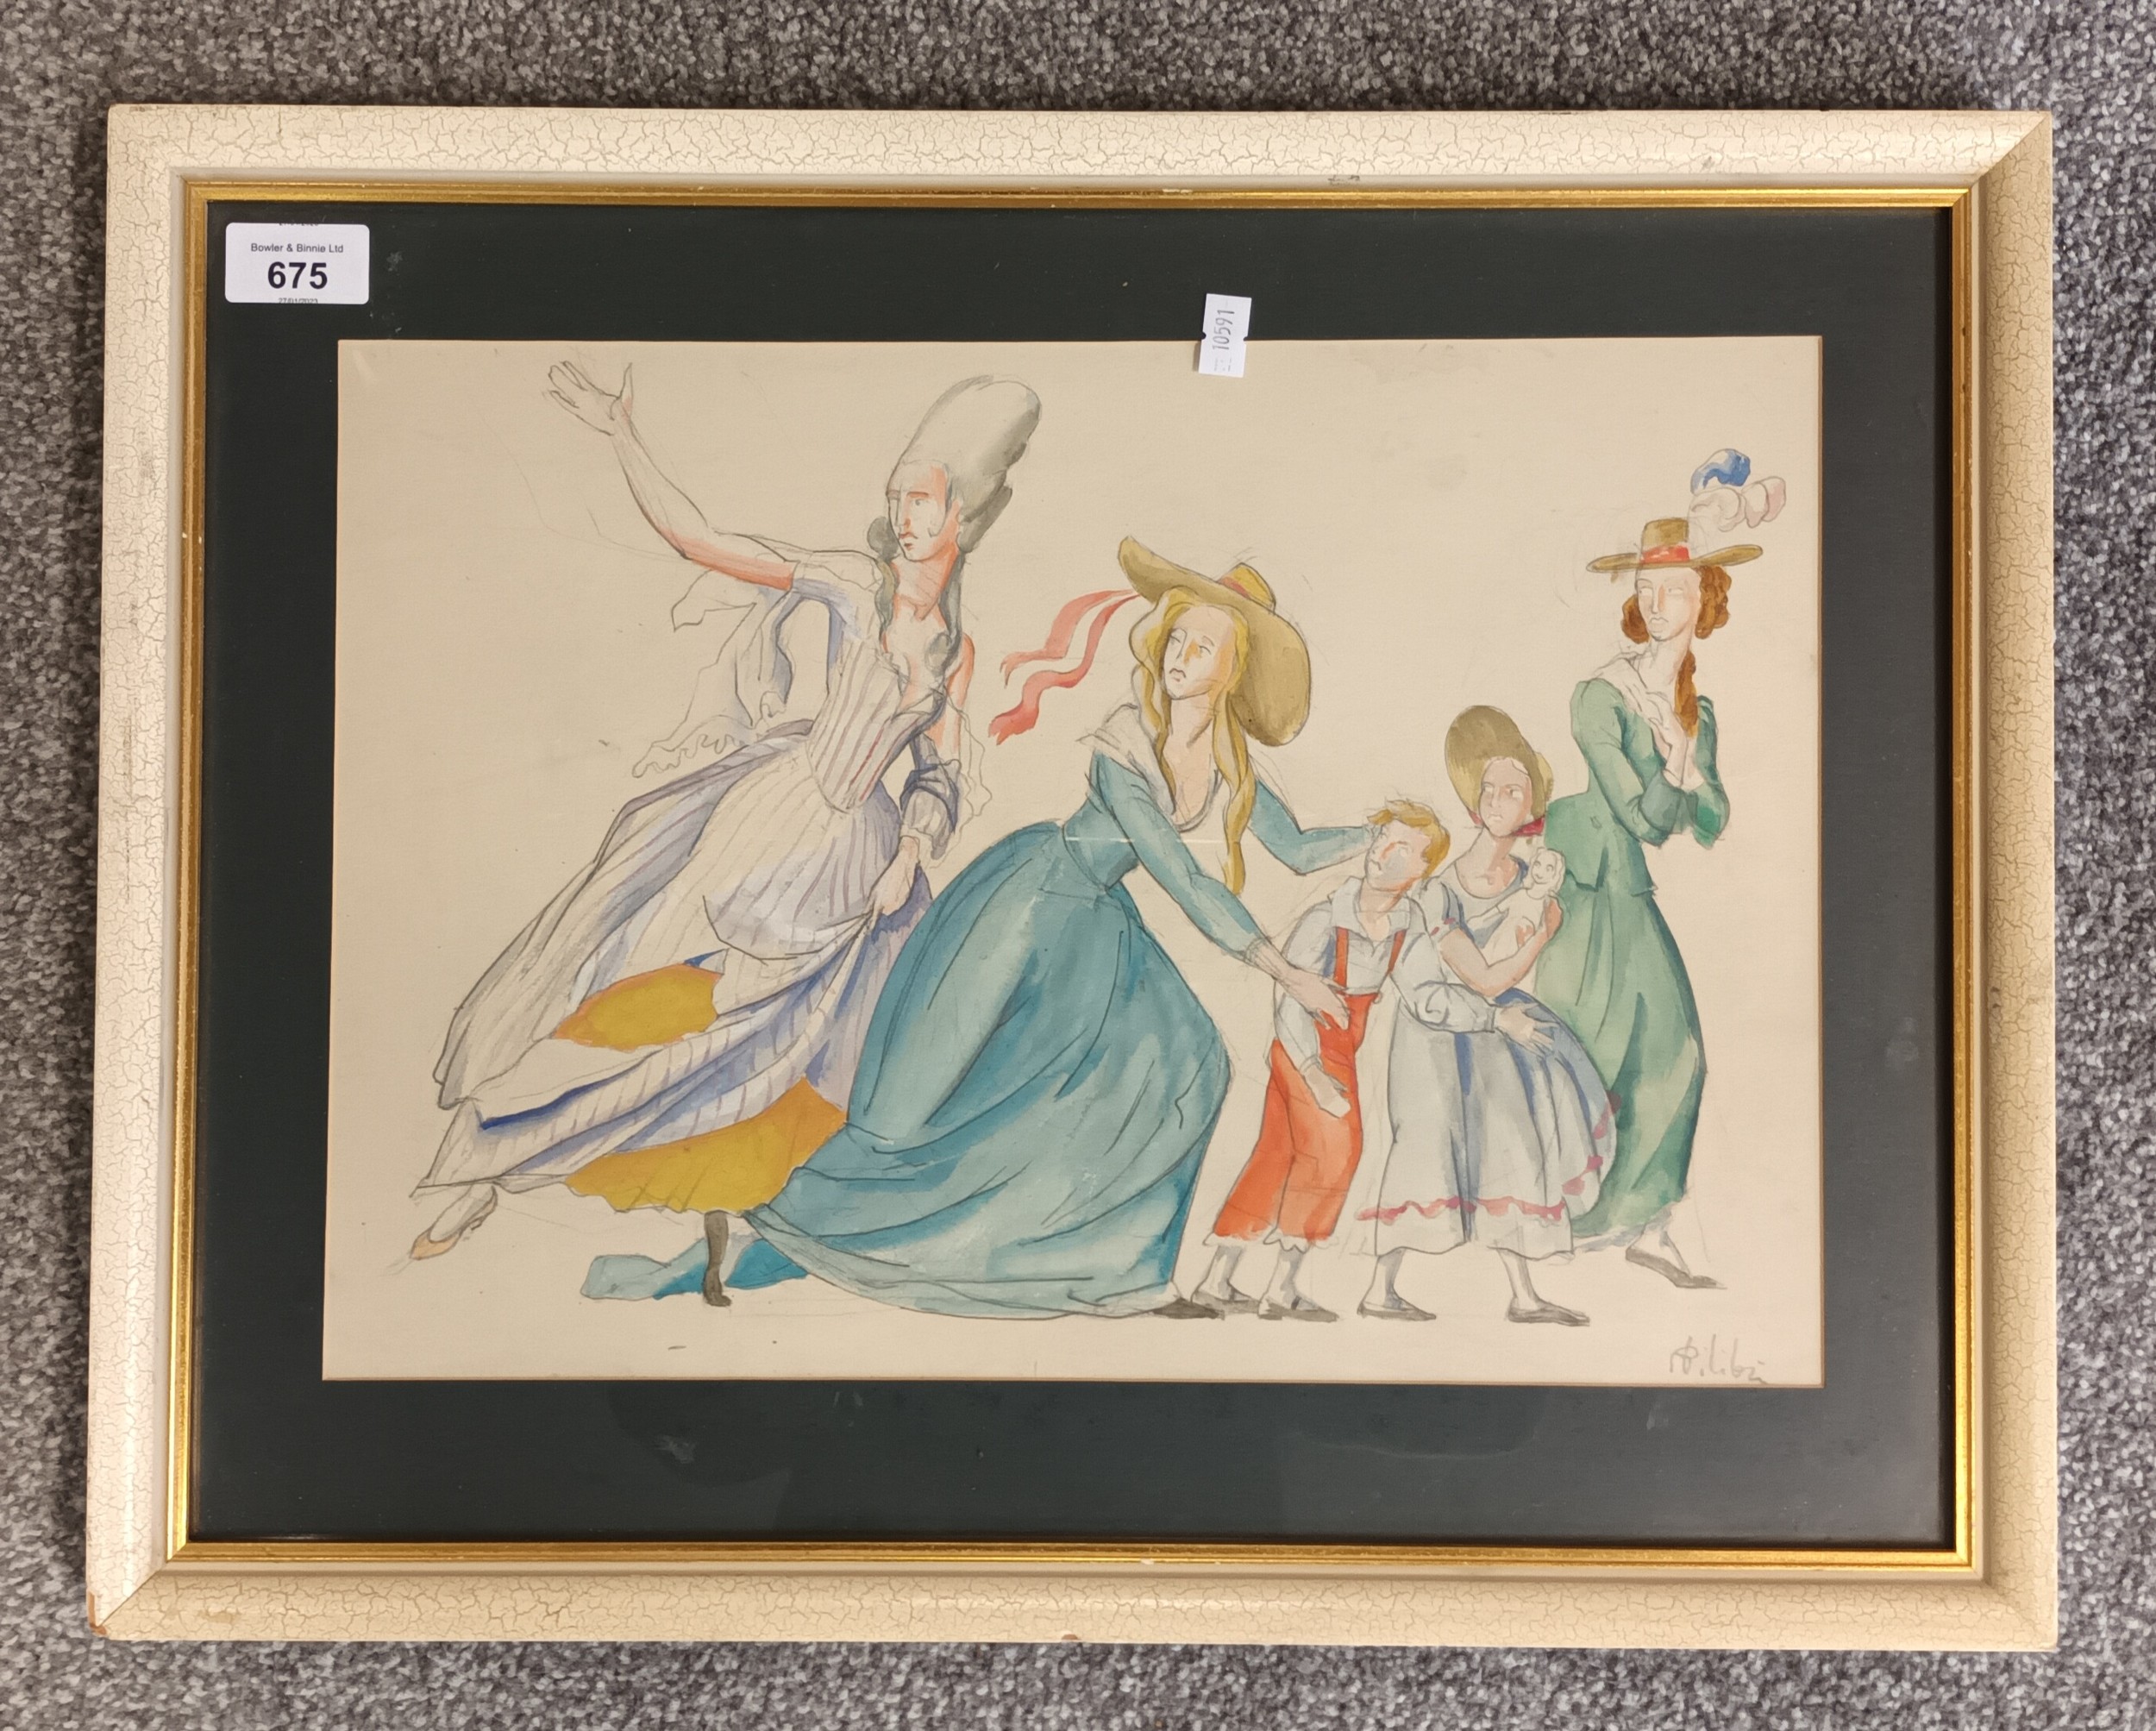 Bilibin (Signed) Watercolour/pencil of the French Revolution. [40x52cm] - Image 2 of 4